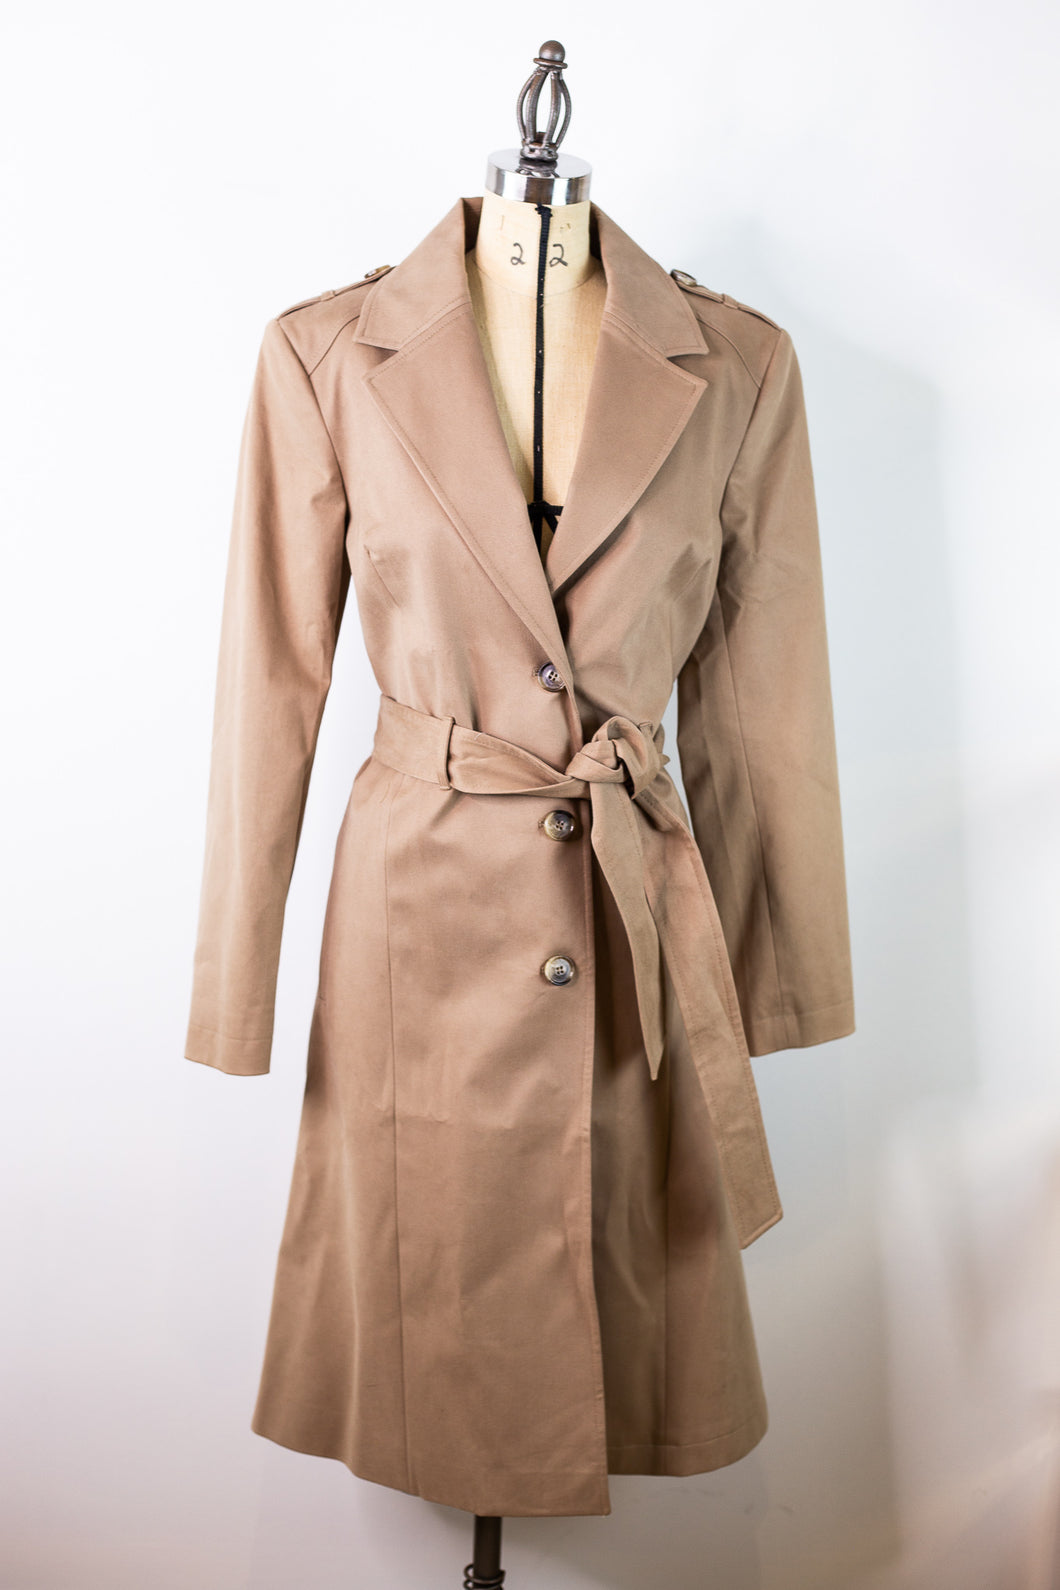 Anine Bing Trench Coat - New with tags